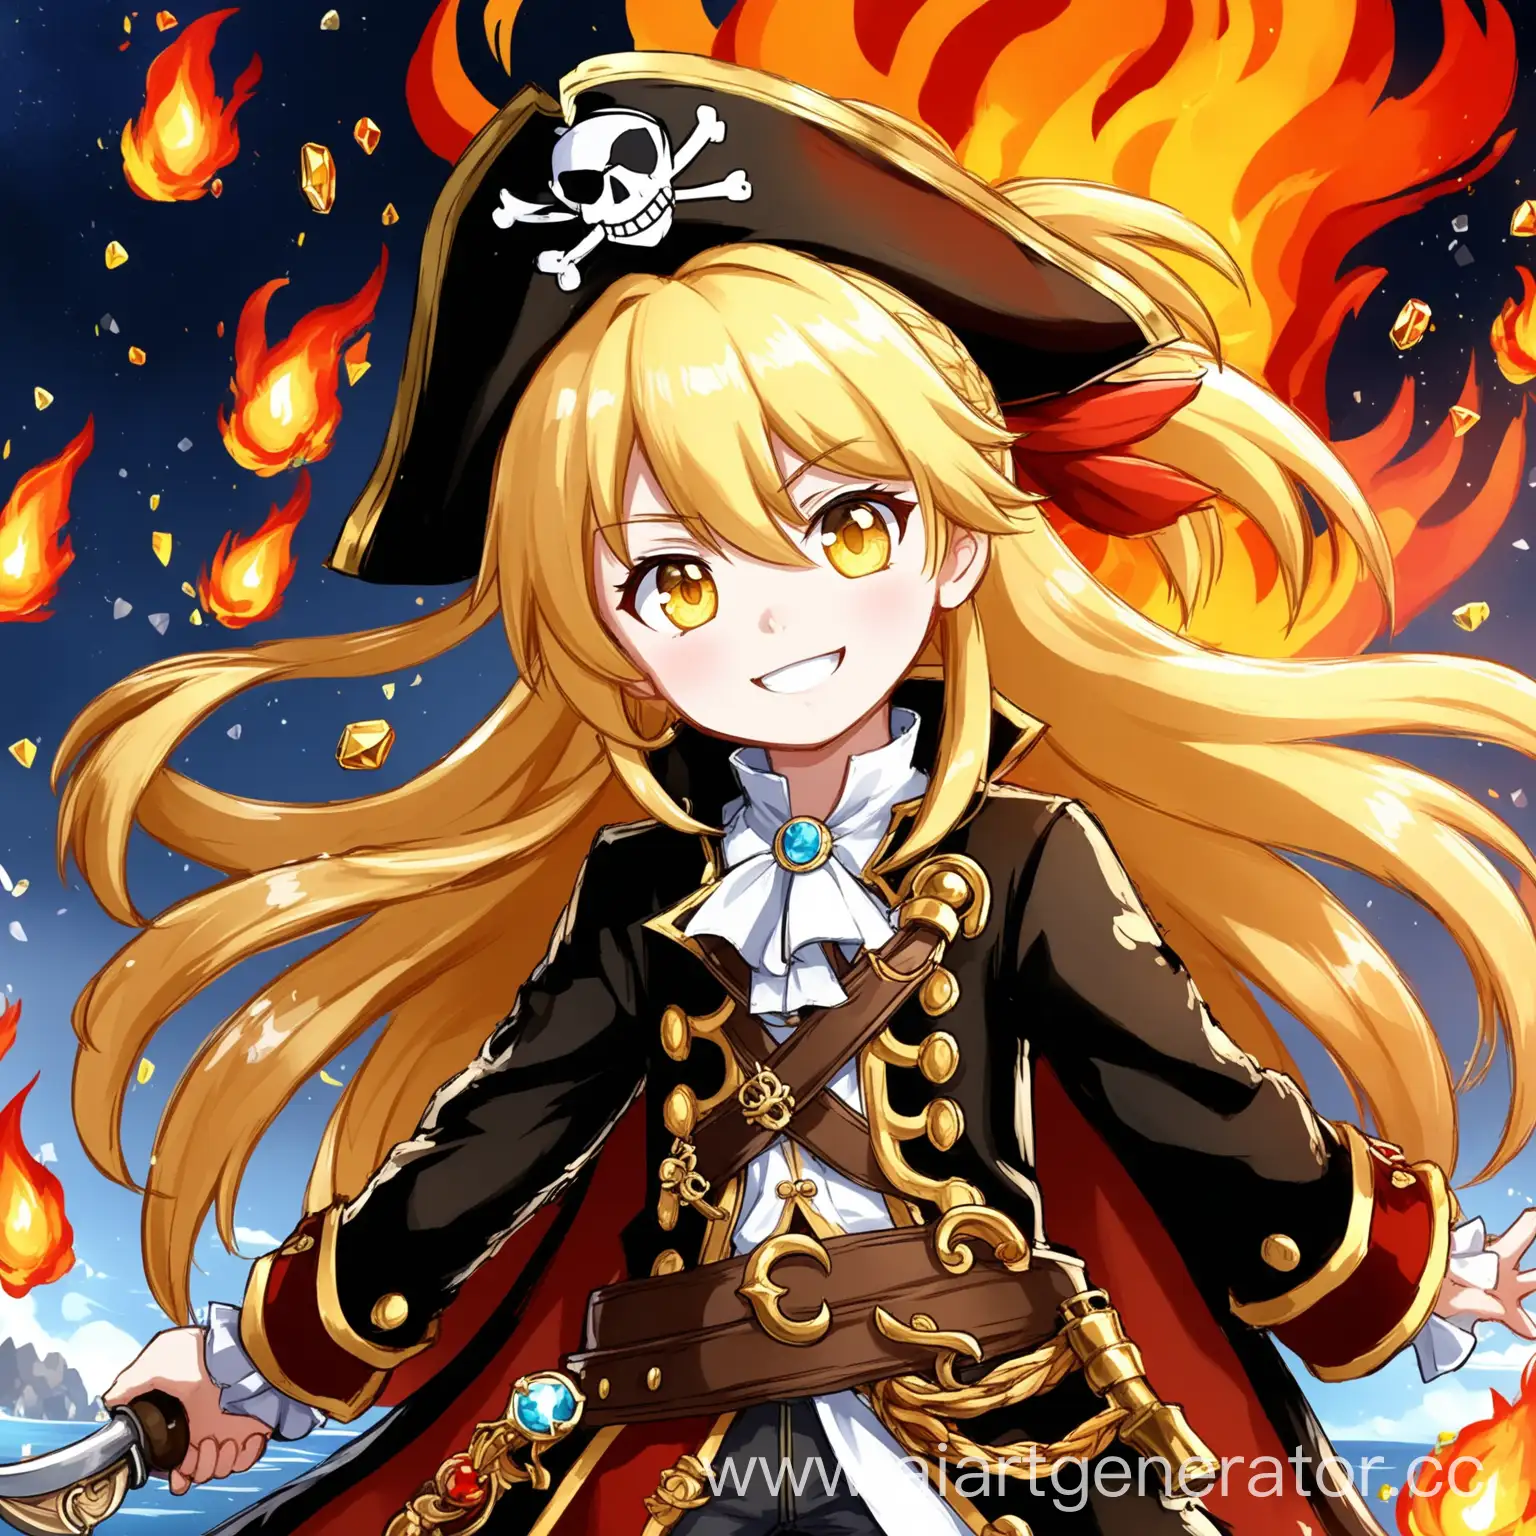 Adorable-8YearOld-Anime-Girl-in-Pirate-Costume-with-Bright-Smile-and-Fiery-Background